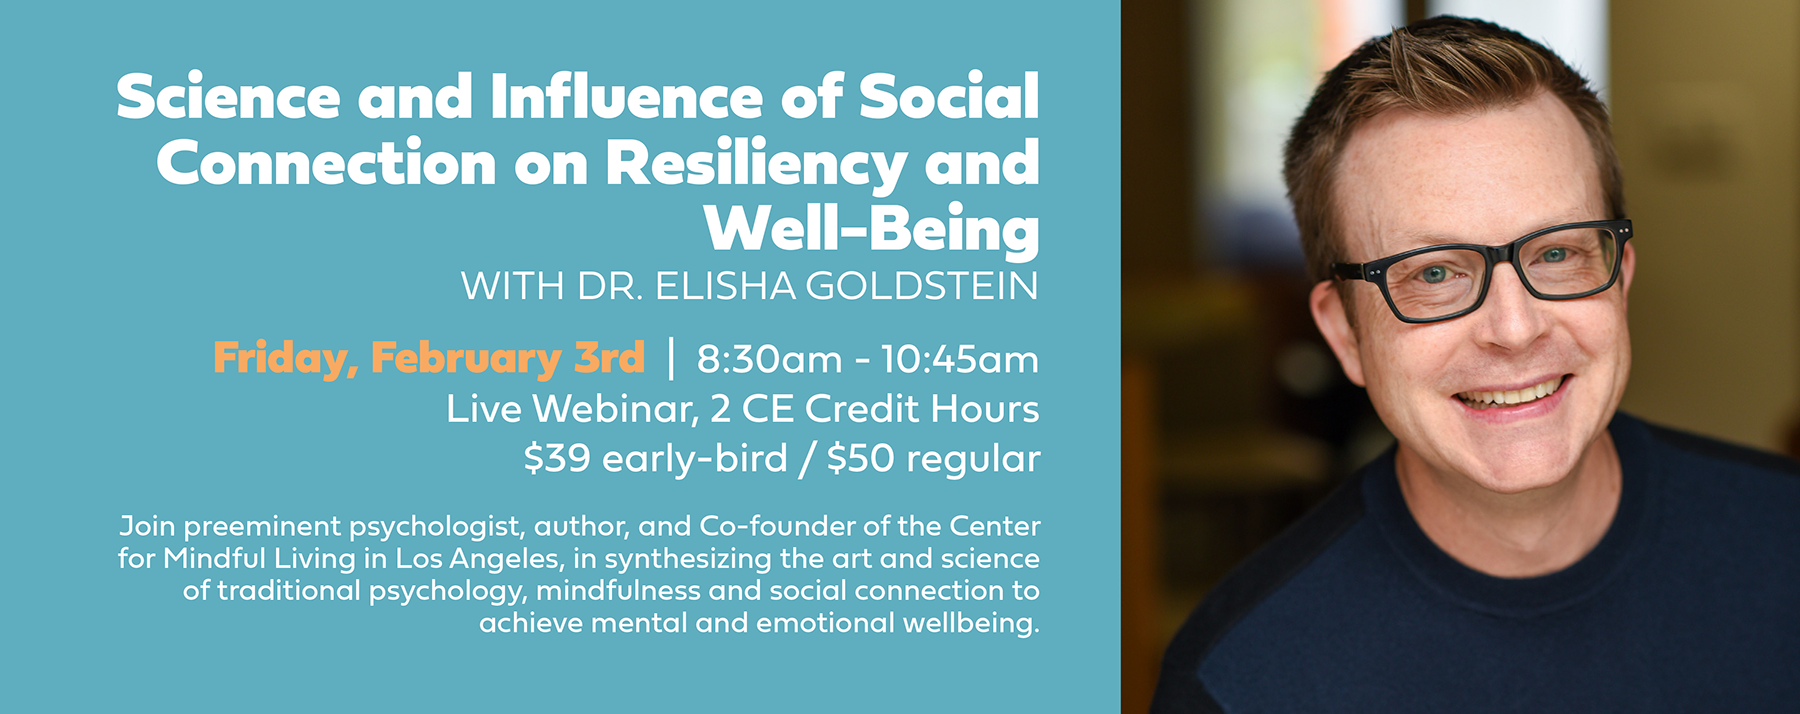 Science and Influence of Social Connection on Resiliency and Well-Being - a Continuing Education Course